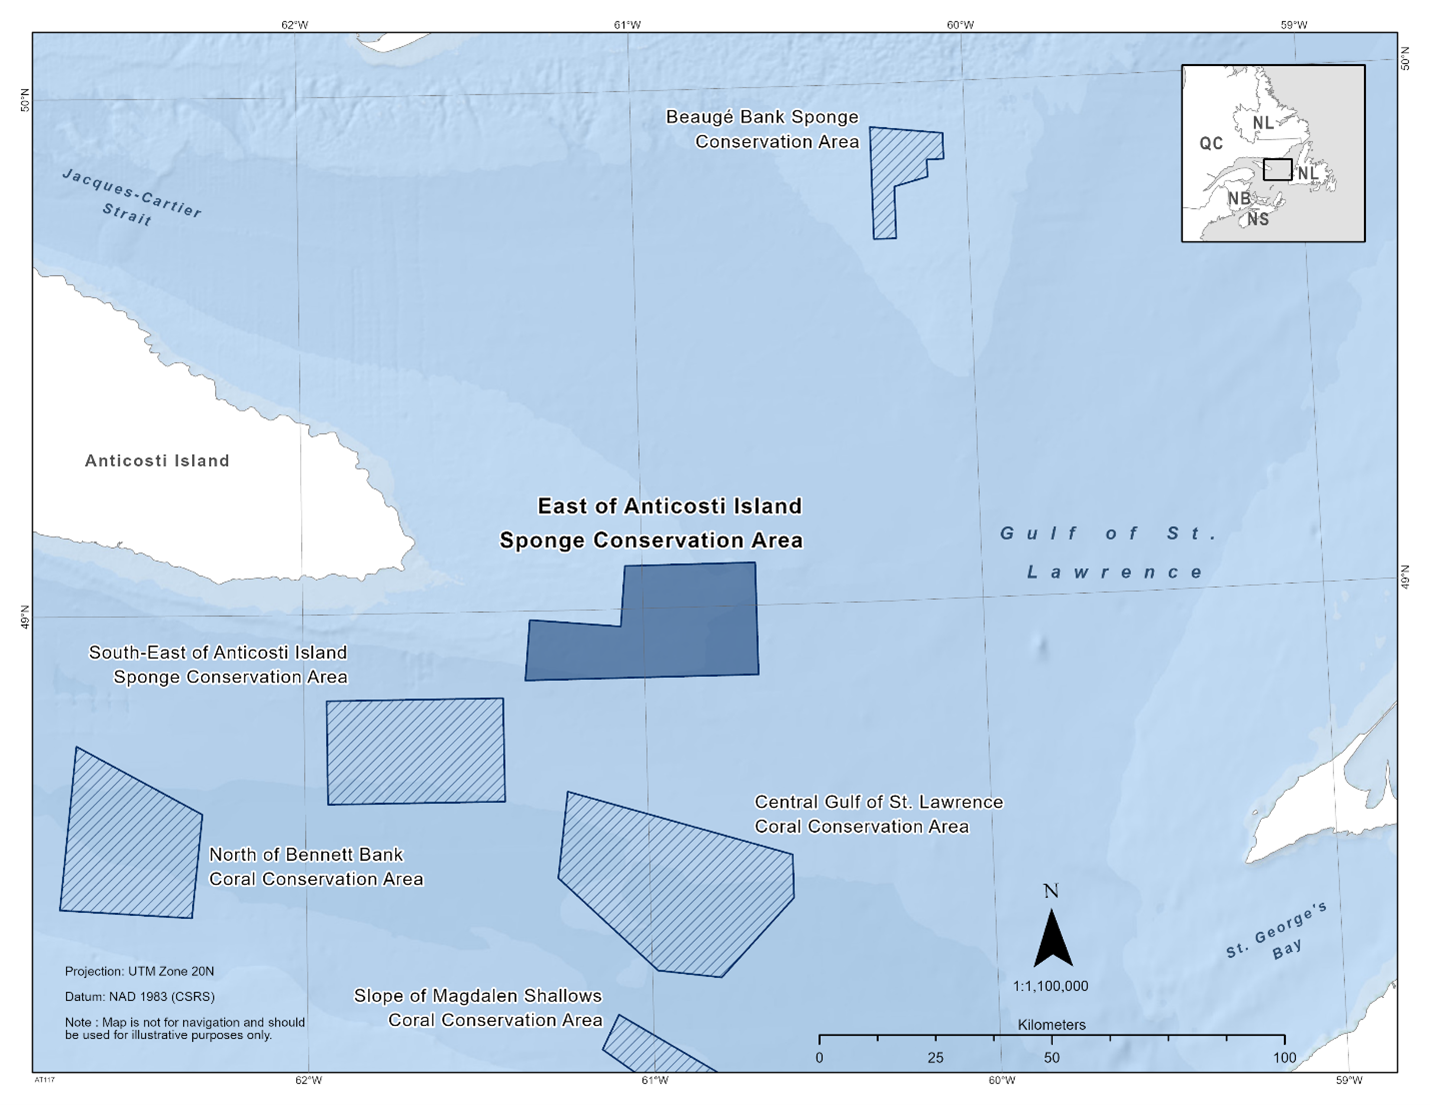 Map of the East of Anticosti Island Sponge Conservation Area in dark blue. The map also features the other marine refuges nearby with dark blue diagonal lines across (Beaugé Bank Sponge Conservation Area, South-East of Anticosti Island Sponge Conservation Area, North of Bennett Bank Coral Conservation Area, Slope of Magdalen Shallows Coral Conservation Area, and the Central Gulf of St. Lawrence Coral Conservation Area).